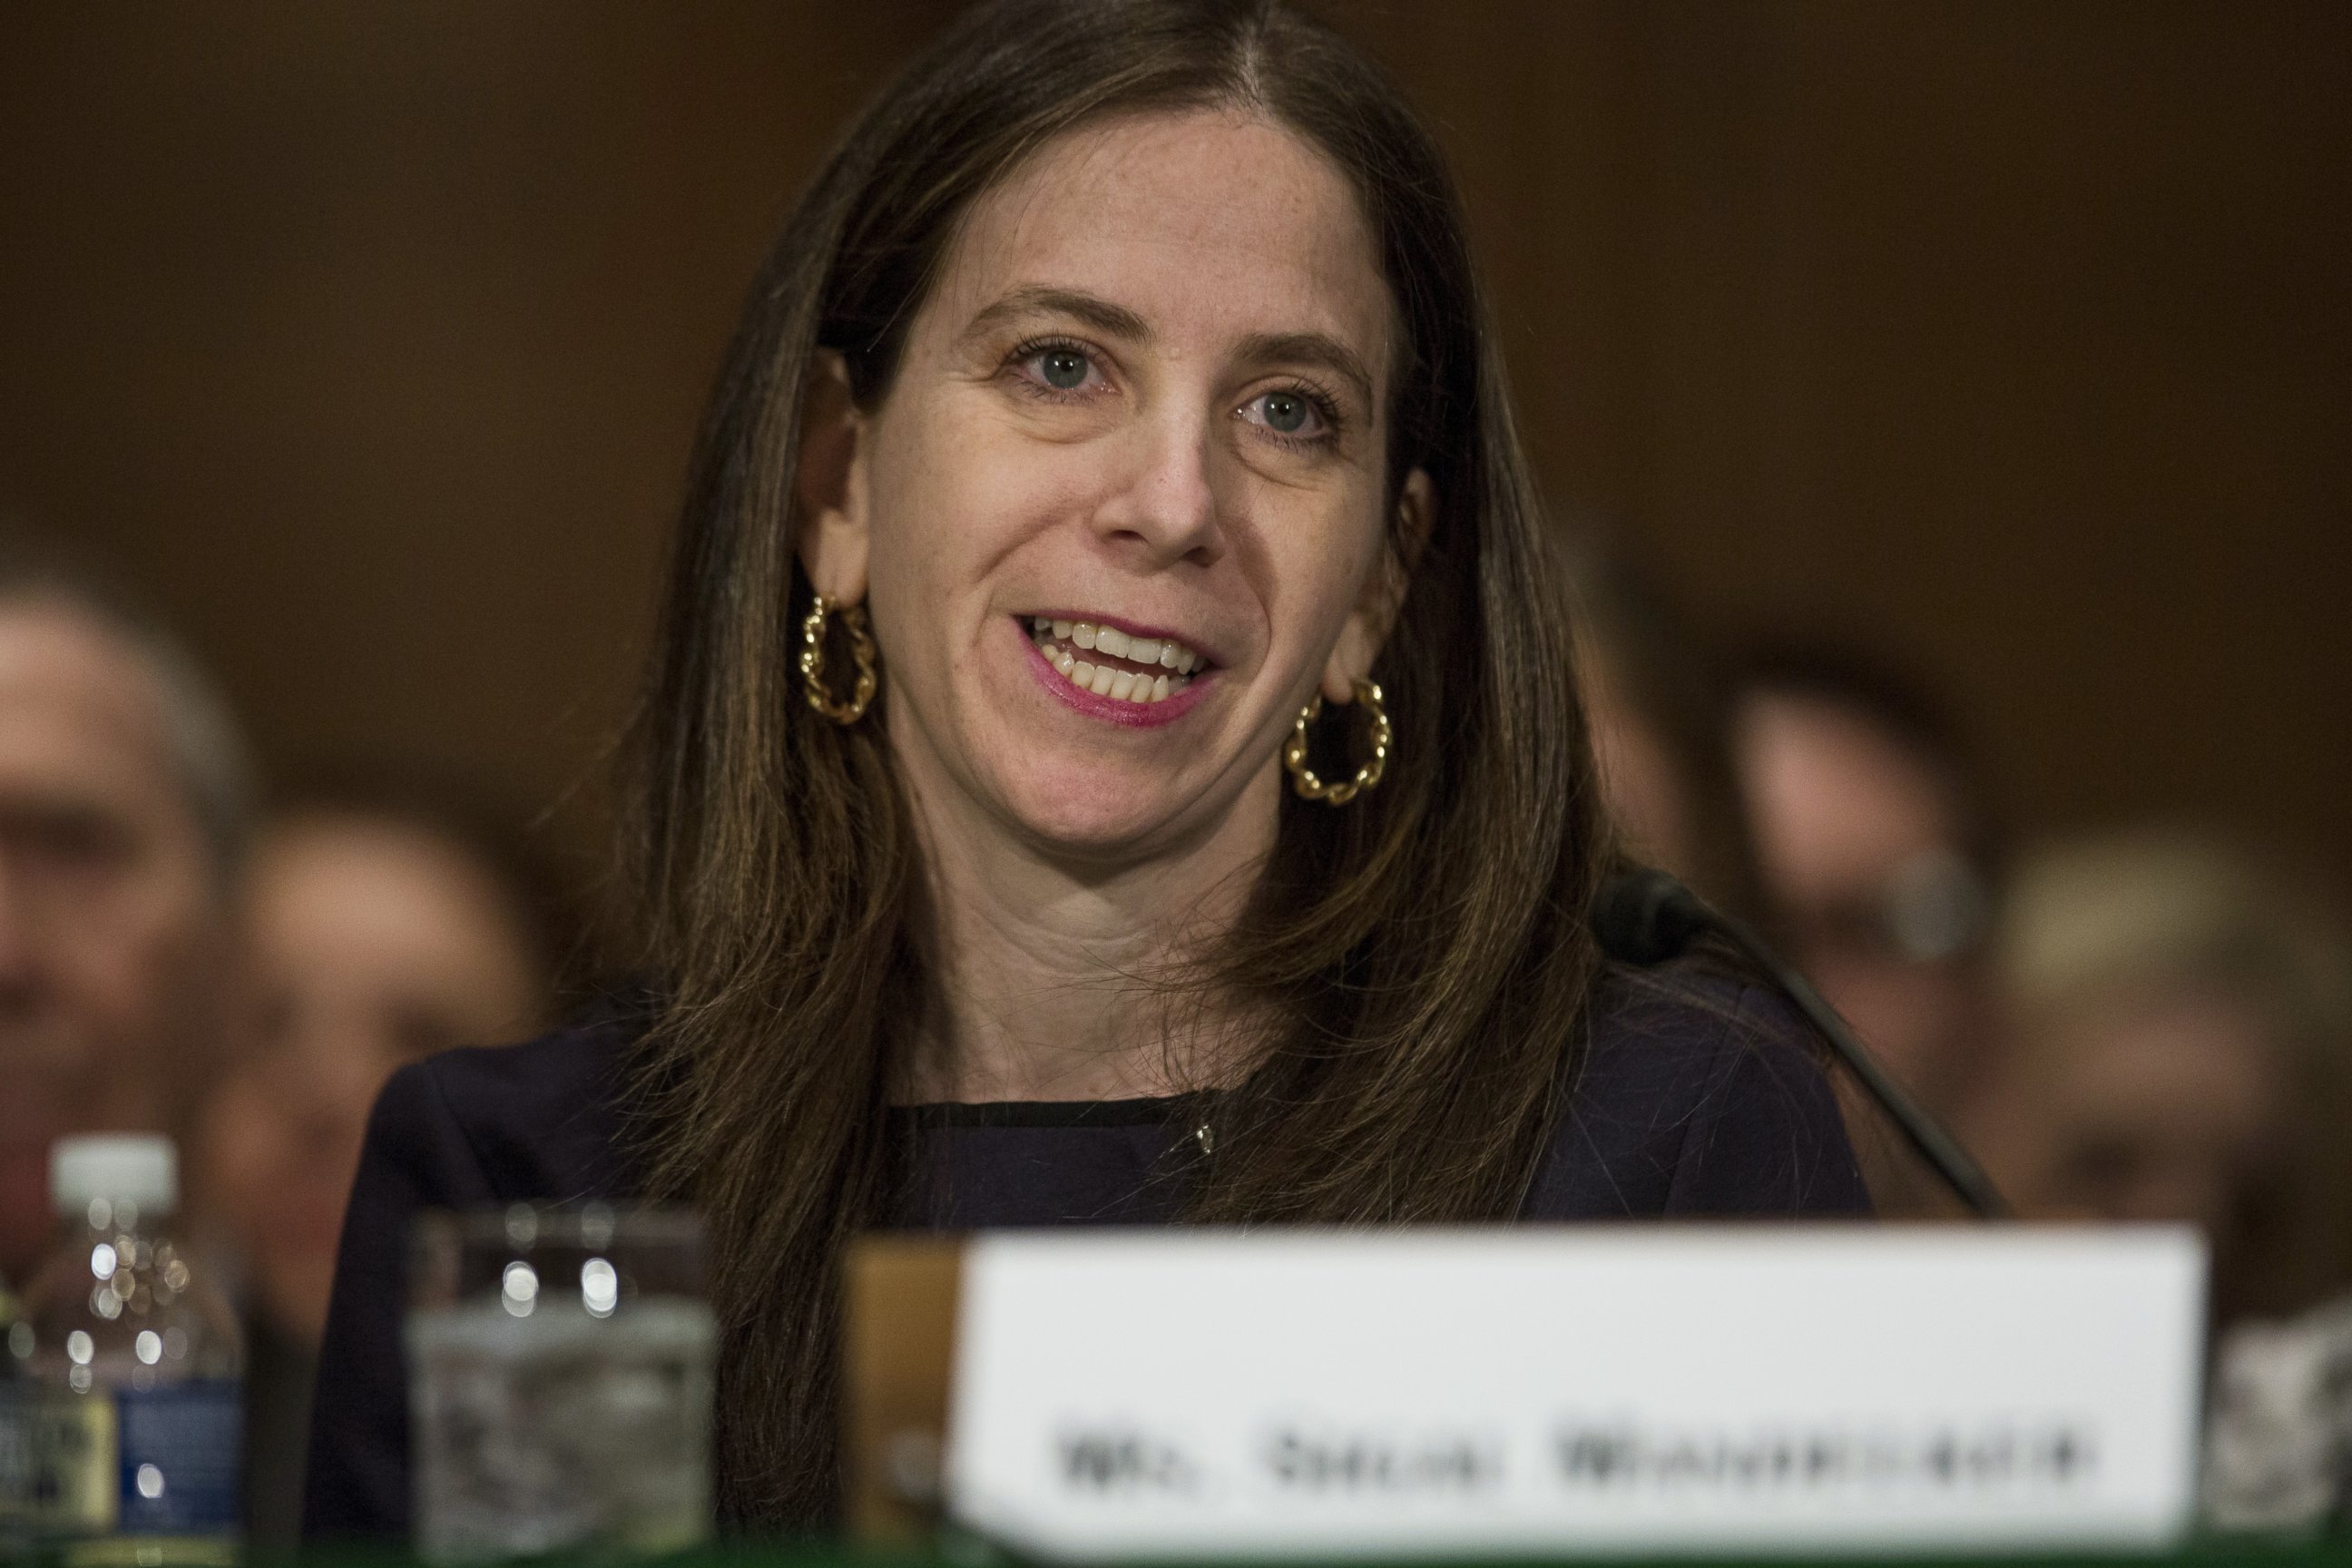 PHOTO: Sigal Mandelker, U.S. Treasury under secretary of terrorism and financial crimes nominee for U.S. President Donald Trump, speaks during a Senate Banking confirmation hearing in Washington, D.C., May 16, 2017.